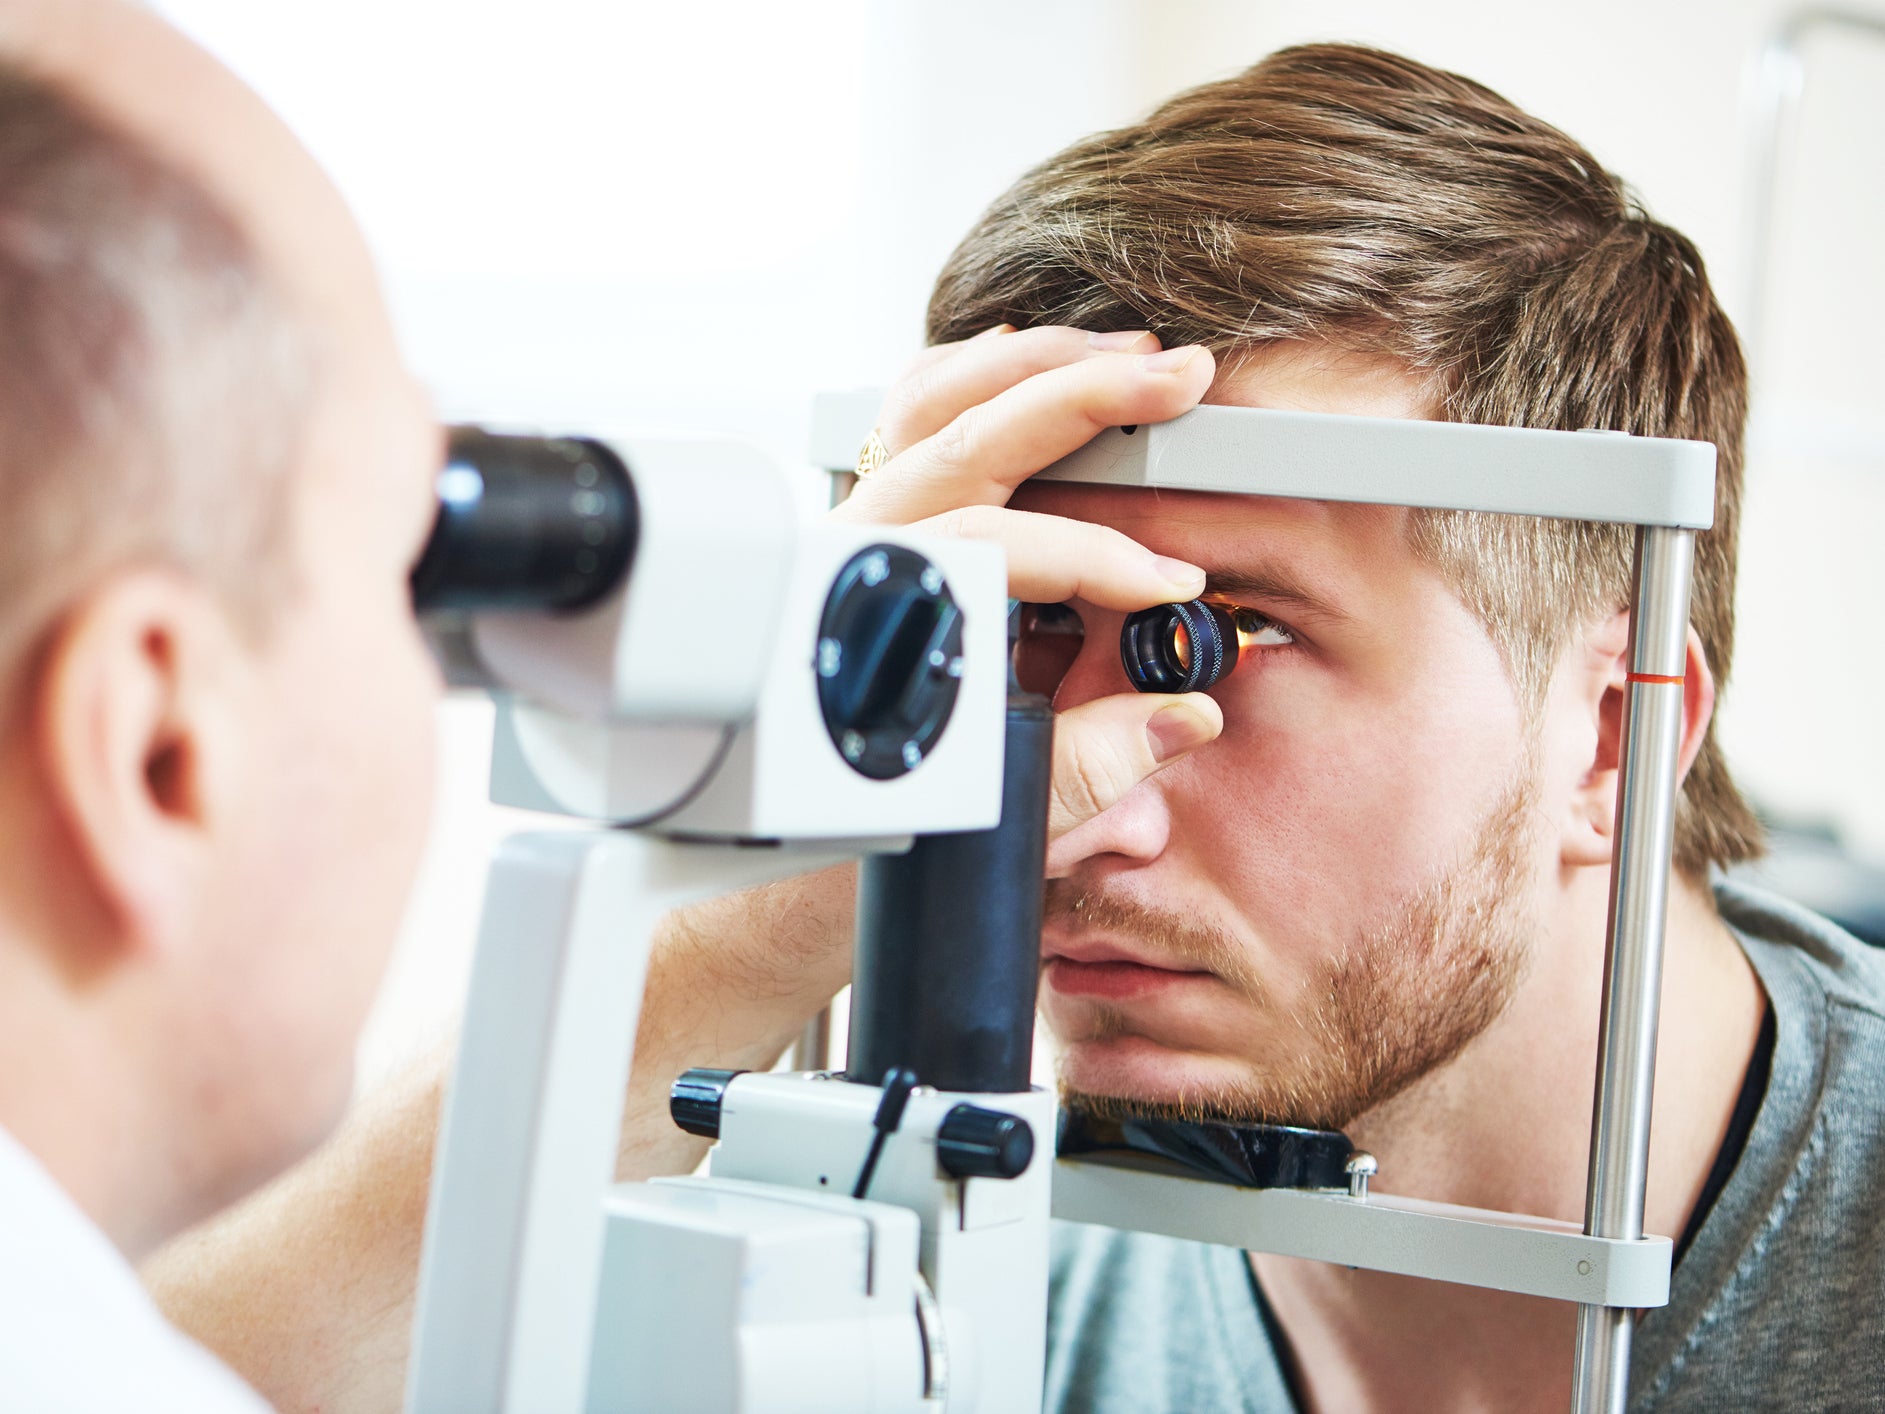 Previous attempts to create a 'bionic eye' dependent on a functioning optic nerve have failed